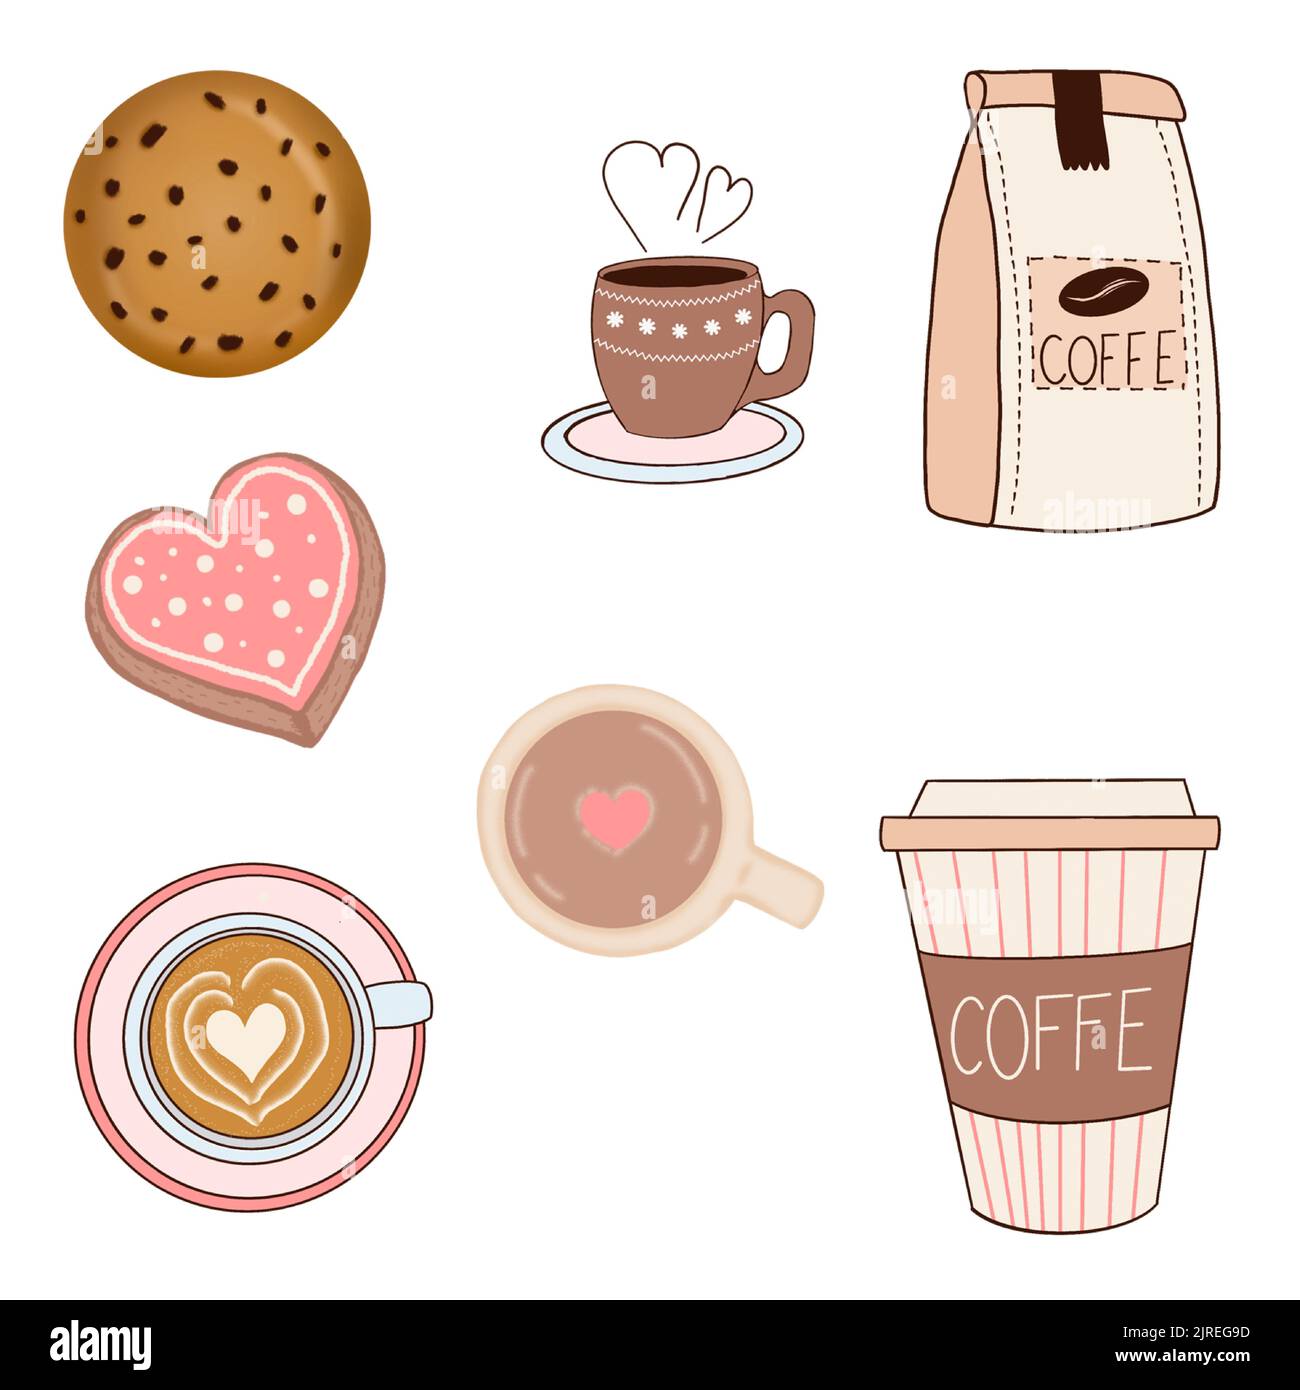 The pixel stickers isolated on white background. Coffee and cookies. Stock Vector